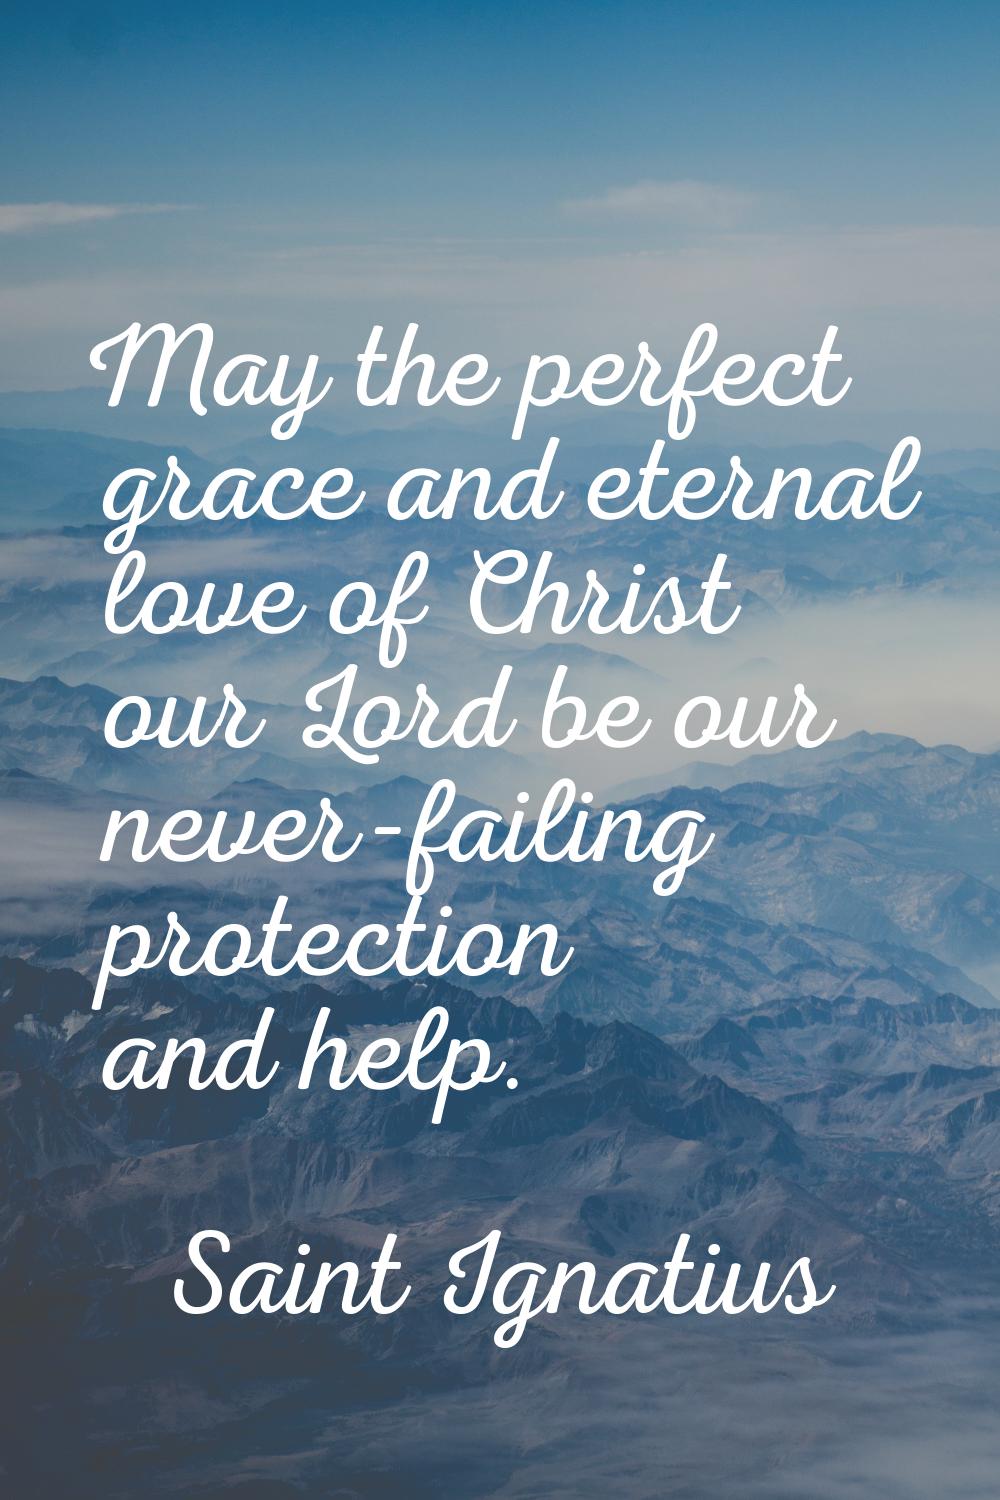 May the perfect grace and eternal love of Christ our Lord be our never-failing protection and help.